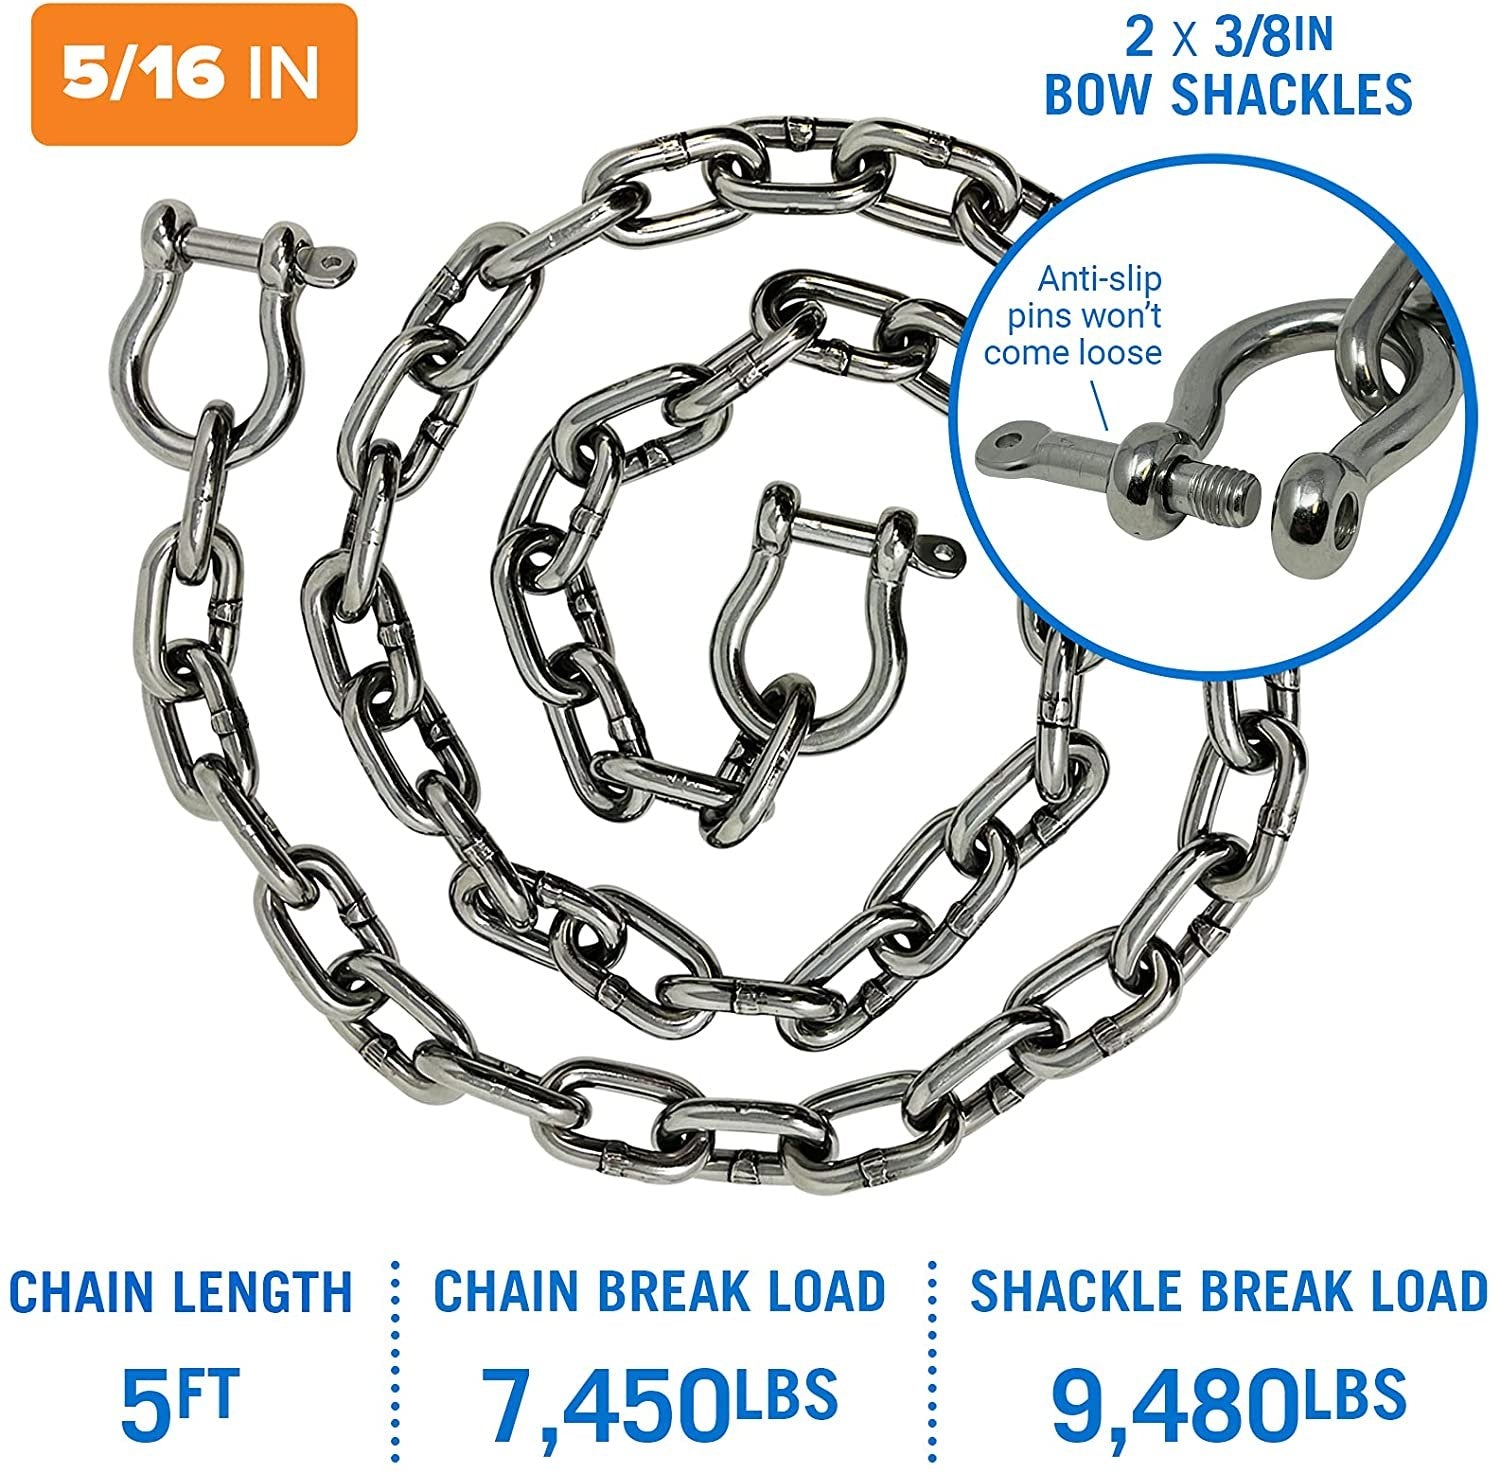 Boat Anchor Chain 5 Foot 5/16" Stainless Steel Anchor Chain and Double Shackle Link Ends Marine Grade Boat Accessories for Pontoon, Deck Boat, Open Fisher and More